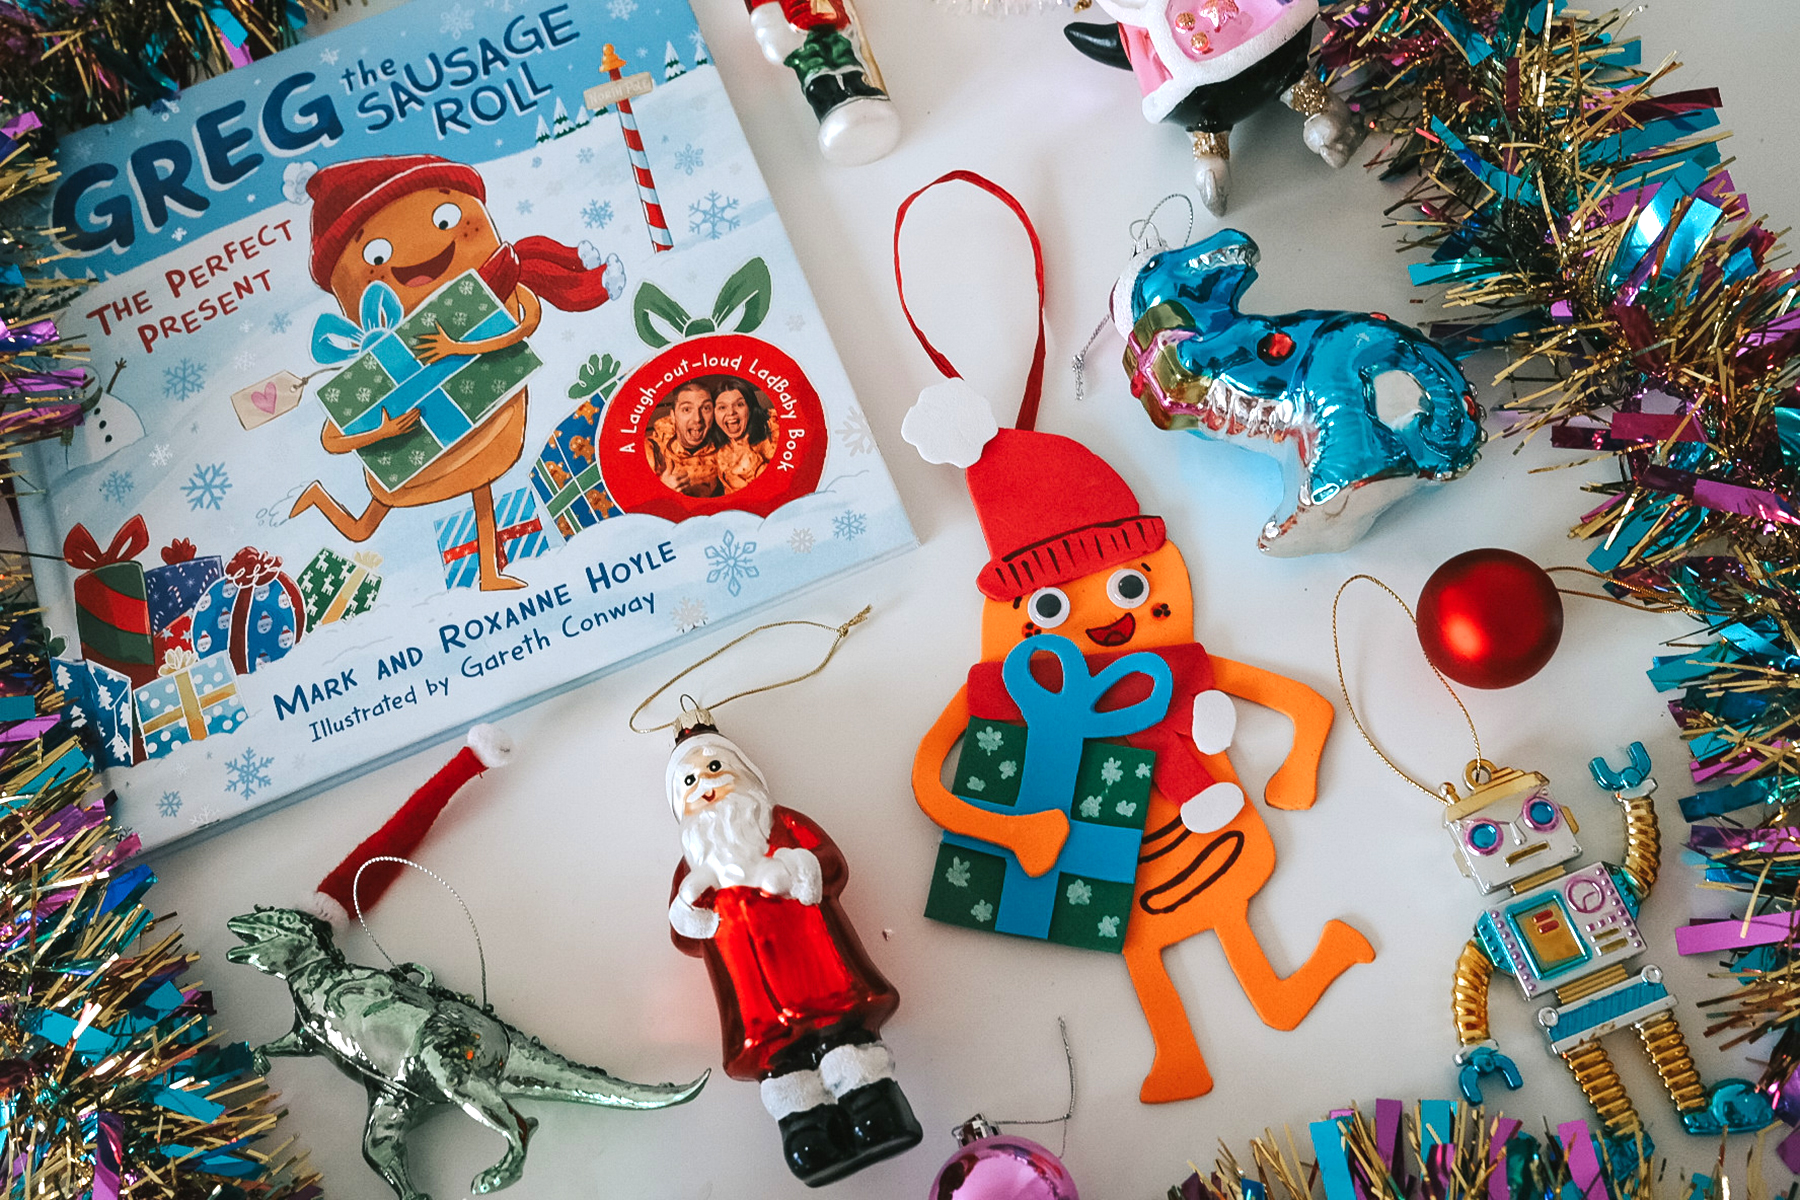 A photo of a handmade Christmas tree decoration of Greg the Sausage Roll surrounded by tinsel, baubles and other decorations, as well as a copy of the new Greg the Sausage Roll book